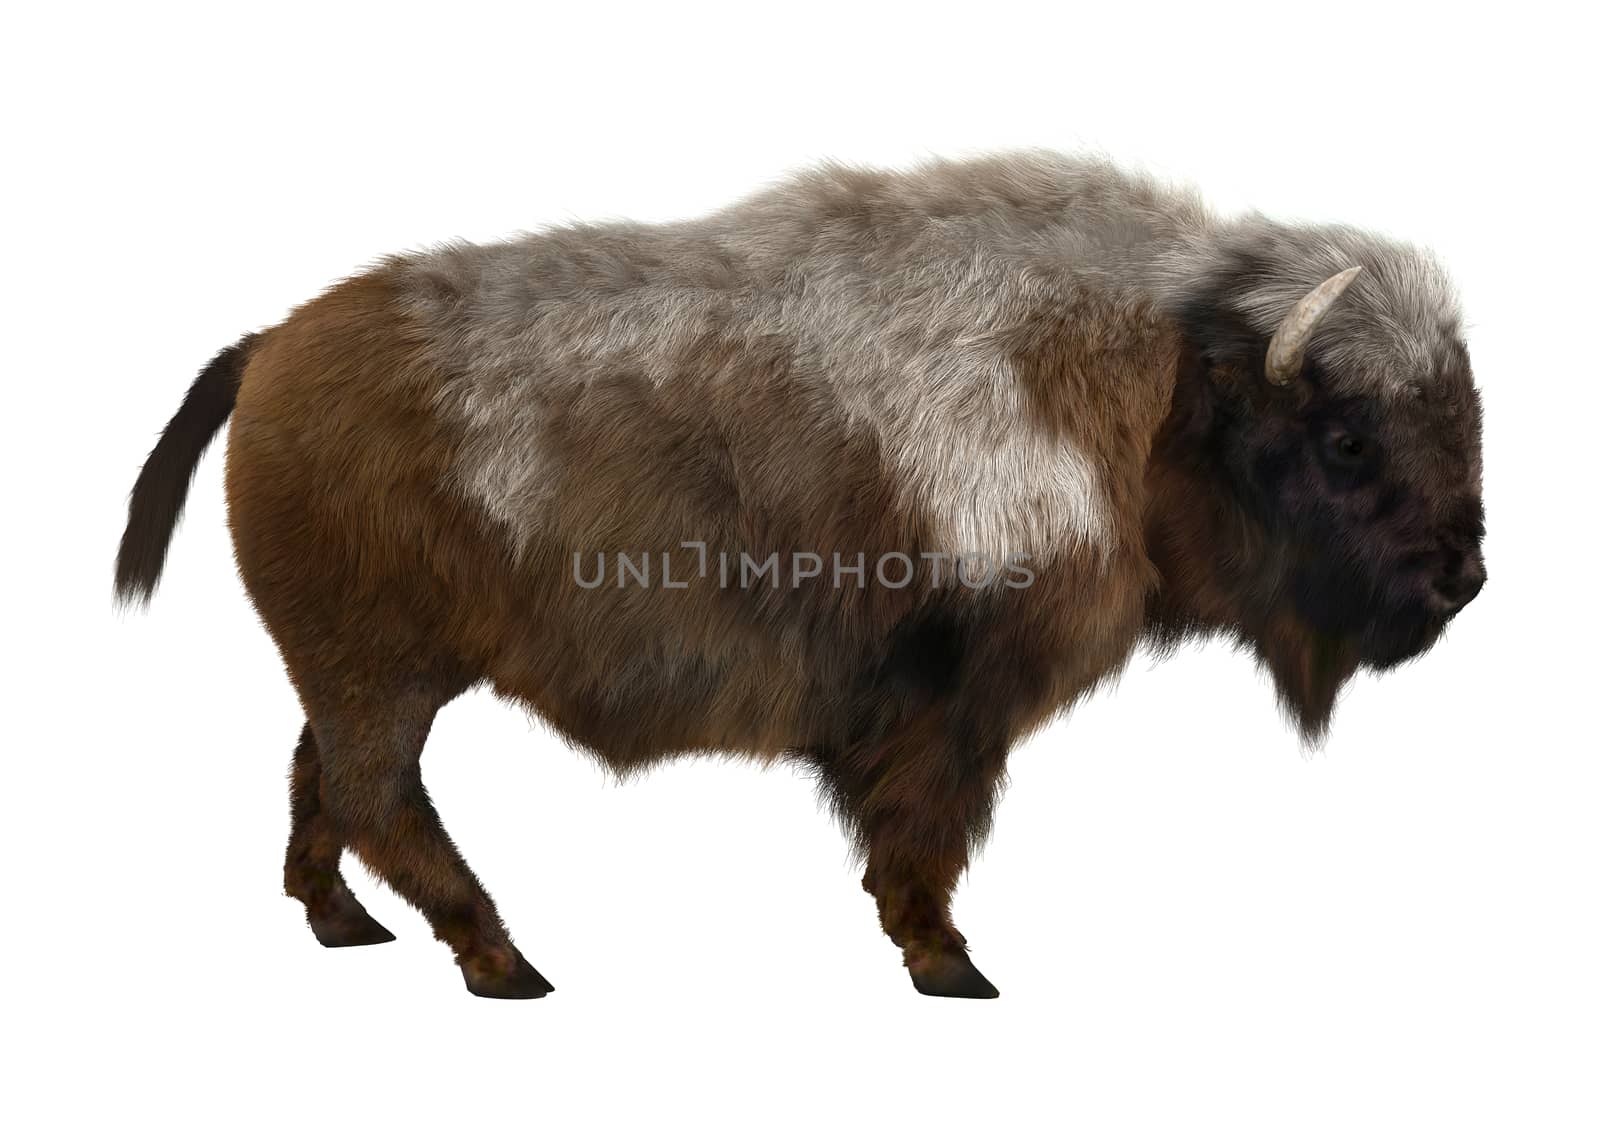 3D digital render of an American bison standing isolated on white background